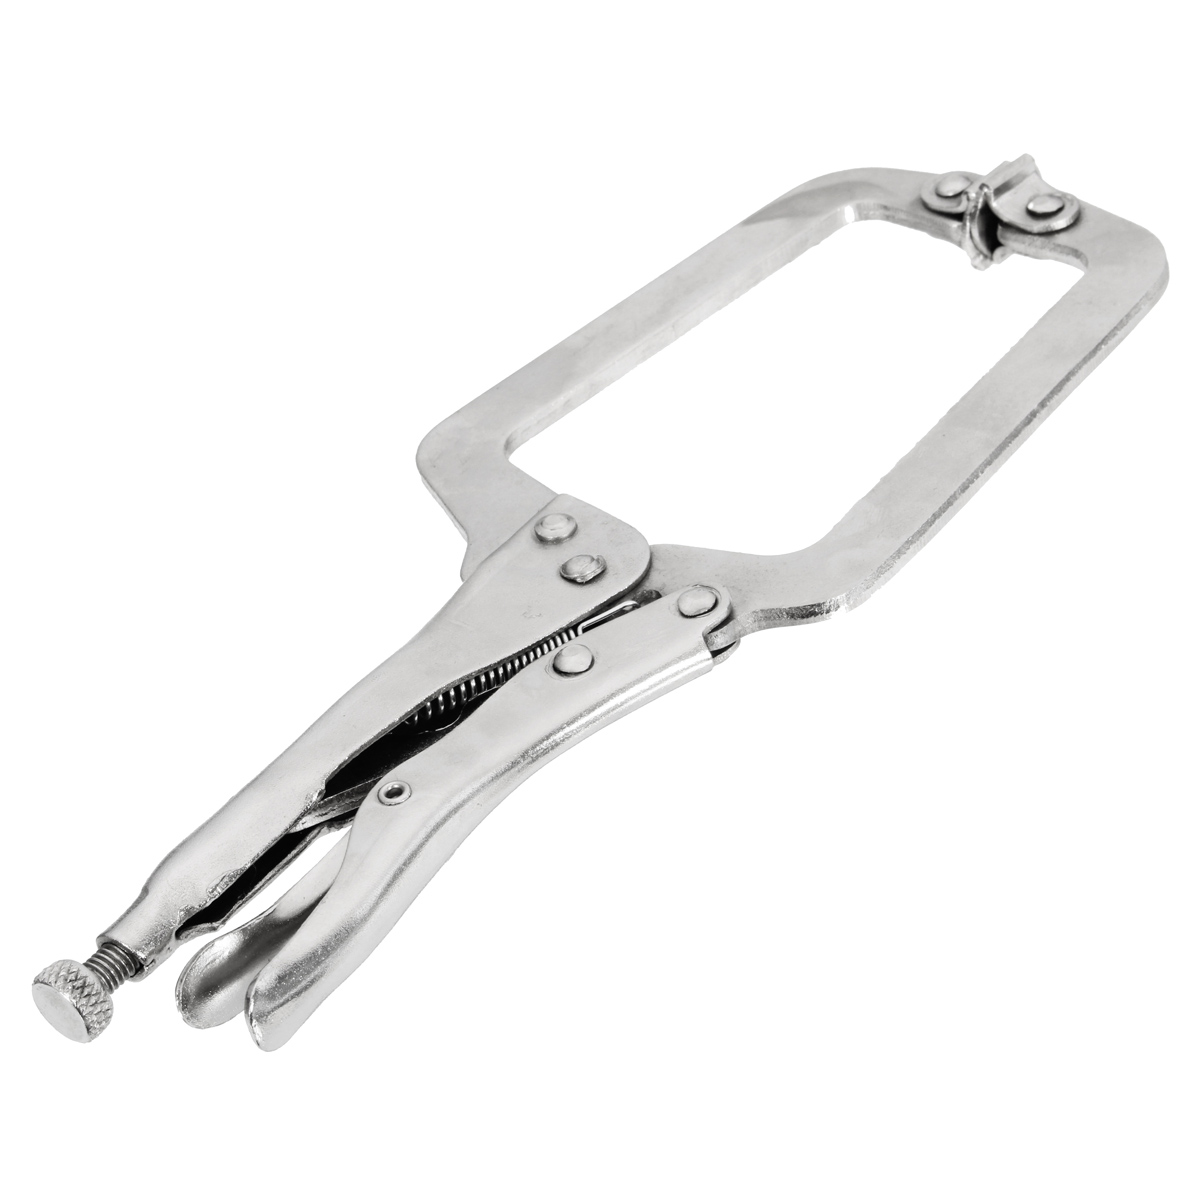 Vise-Grip-9DR-9inch-Deep-Locking-C-Clamp-Adjustable-Plier-With-Swivel-Pad-Vise-Jaw-1089460